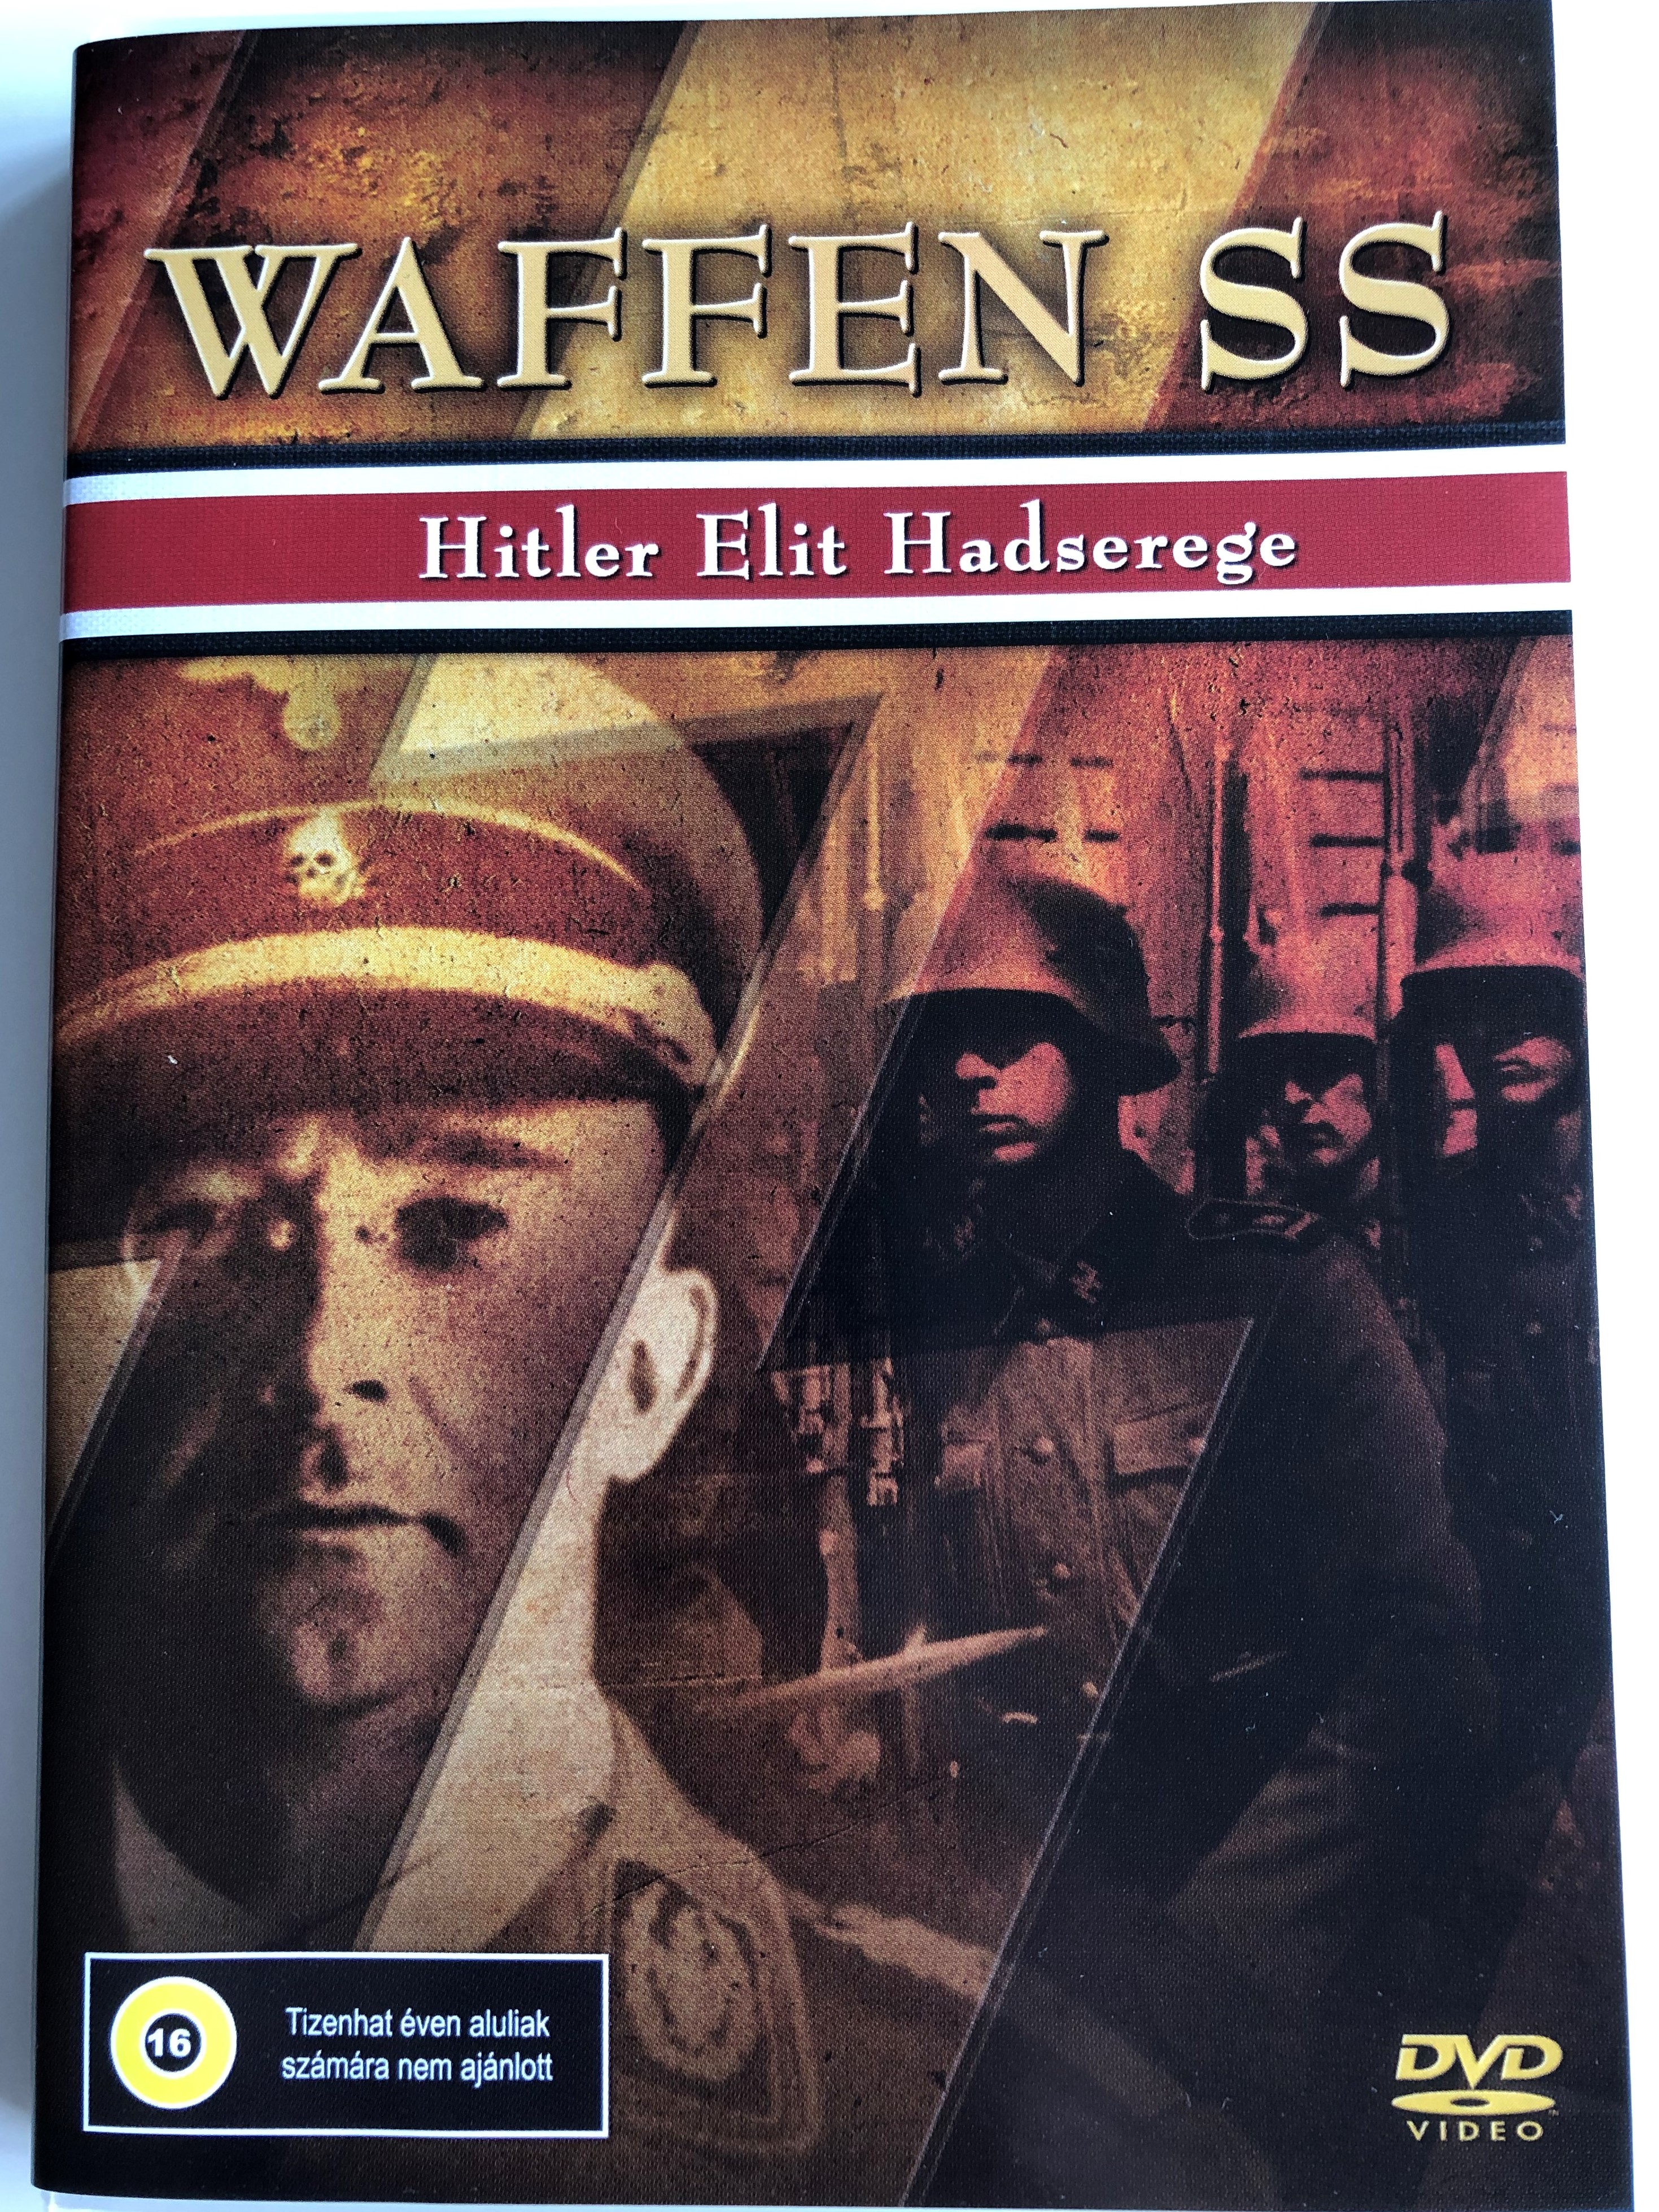 waffen-ss-dvd-1989-hitler-elit-hadserege-waffen-ss-hitler-s-elite-fighting-force-directed-by-michael-campbell-1-.jpg